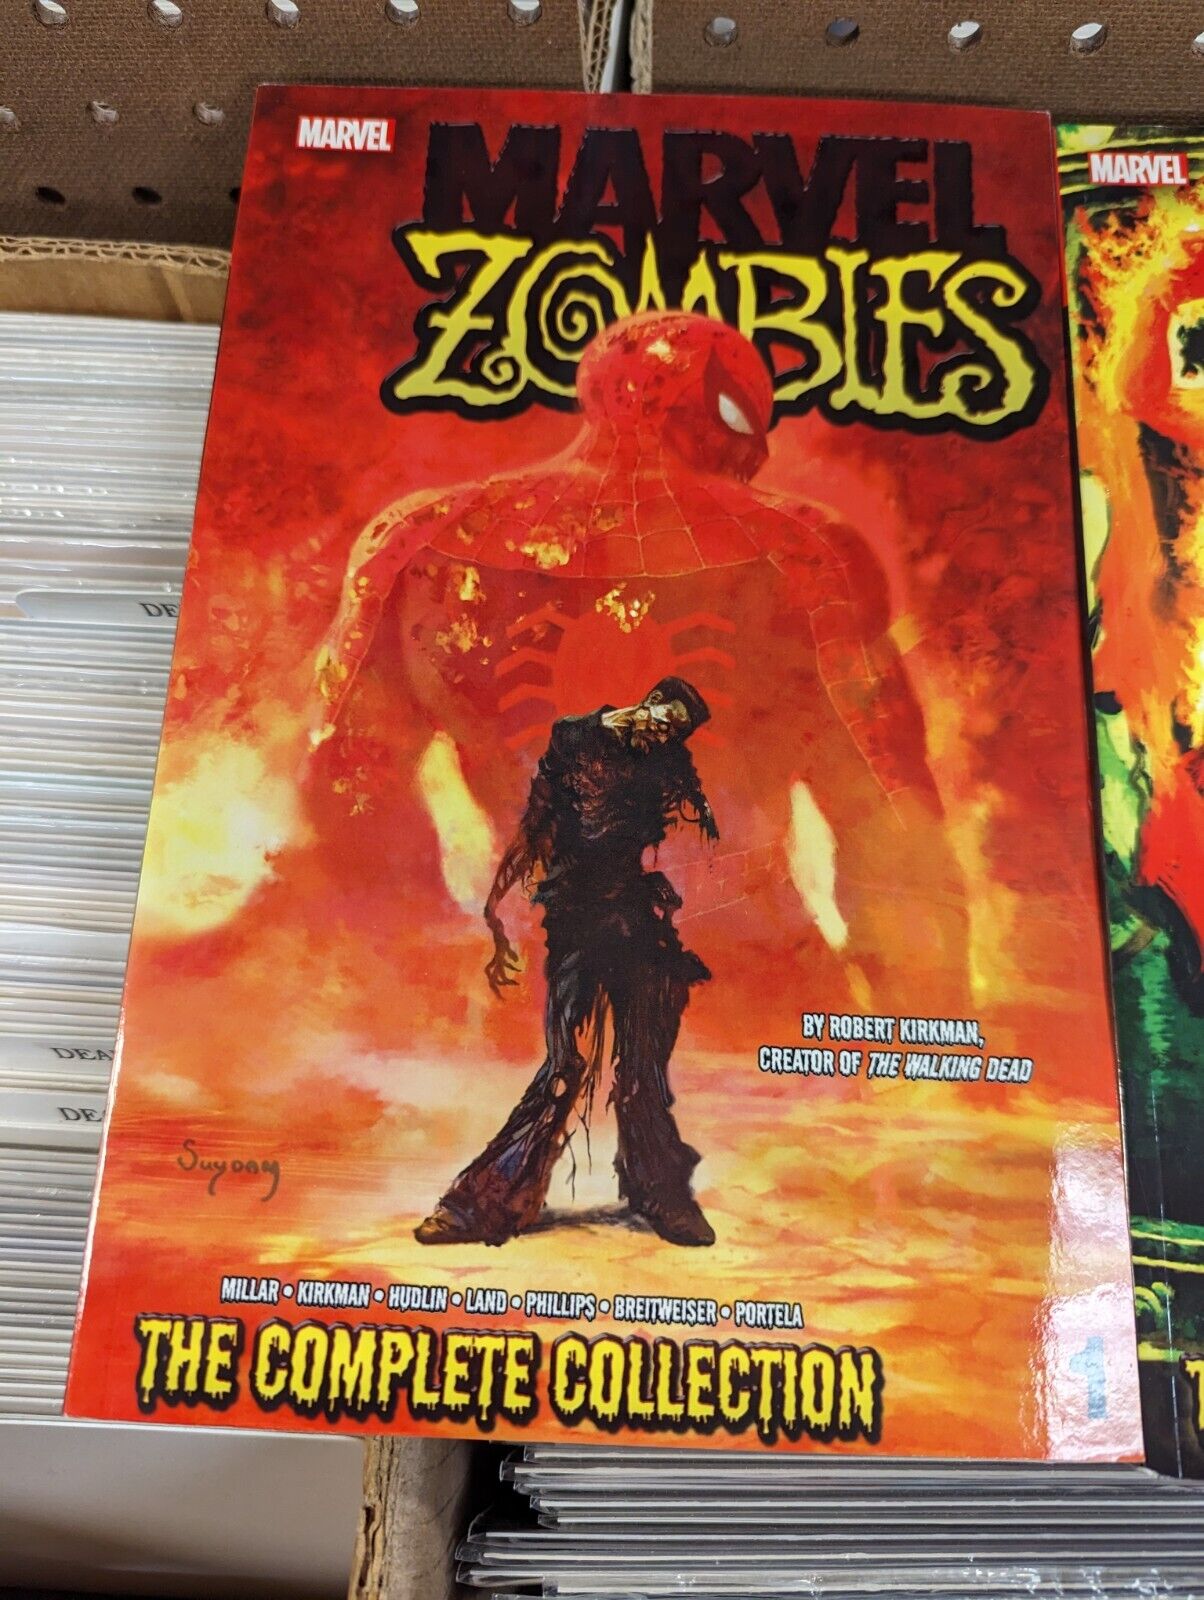 Marvel Zombies The Complete Collection 1 And Marvel Zombies 2 Trade Paperbacks